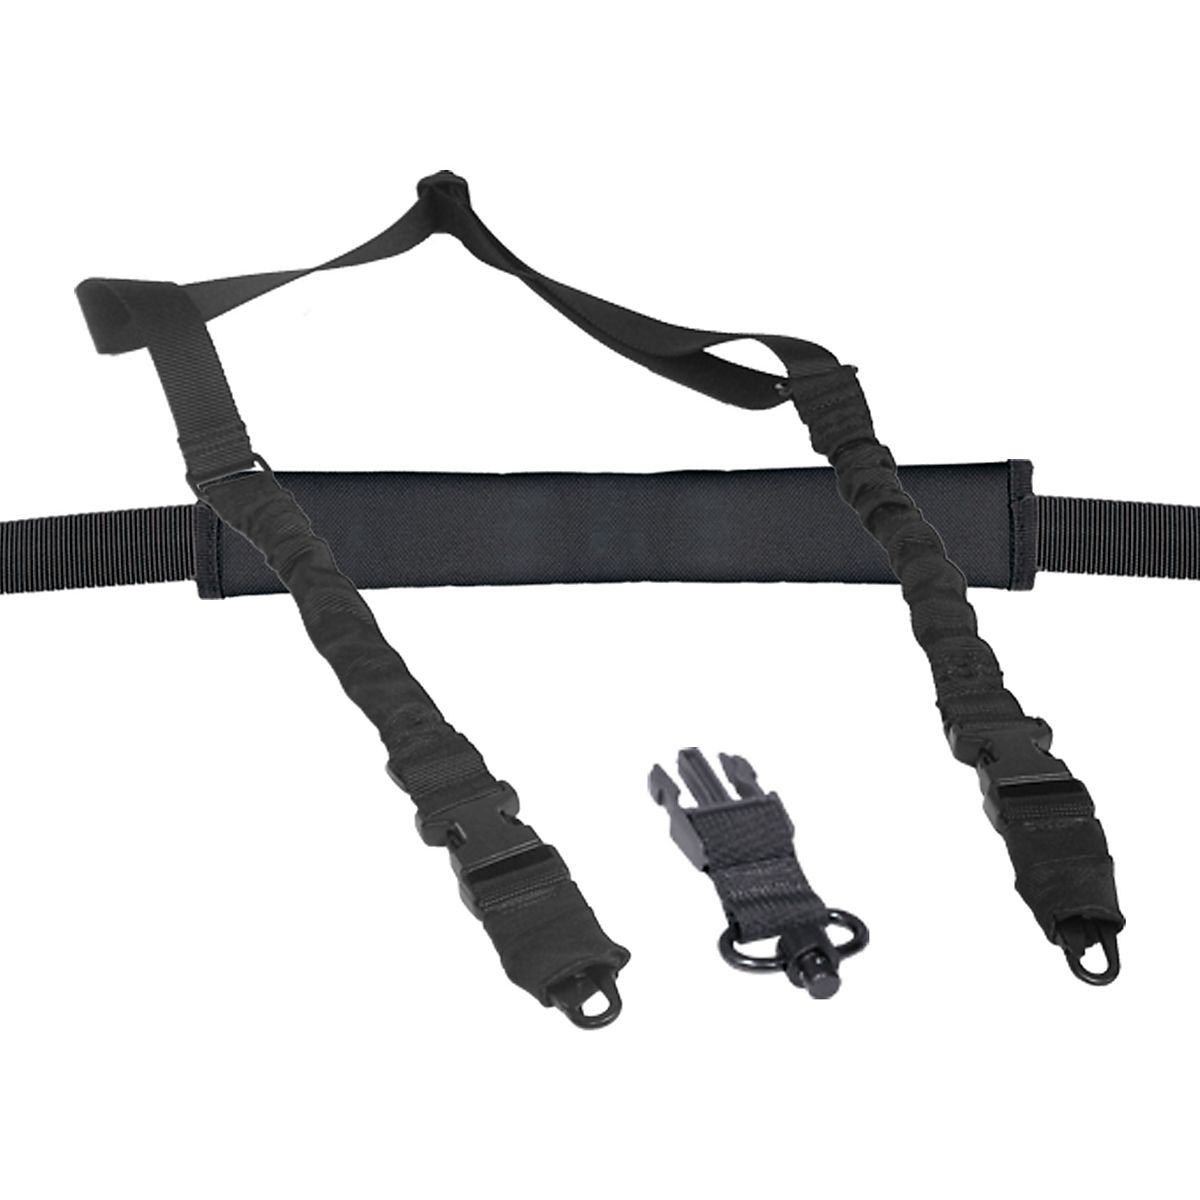 Xtreme Tactical Sports 1- or 2-Point AR Sling | Academy